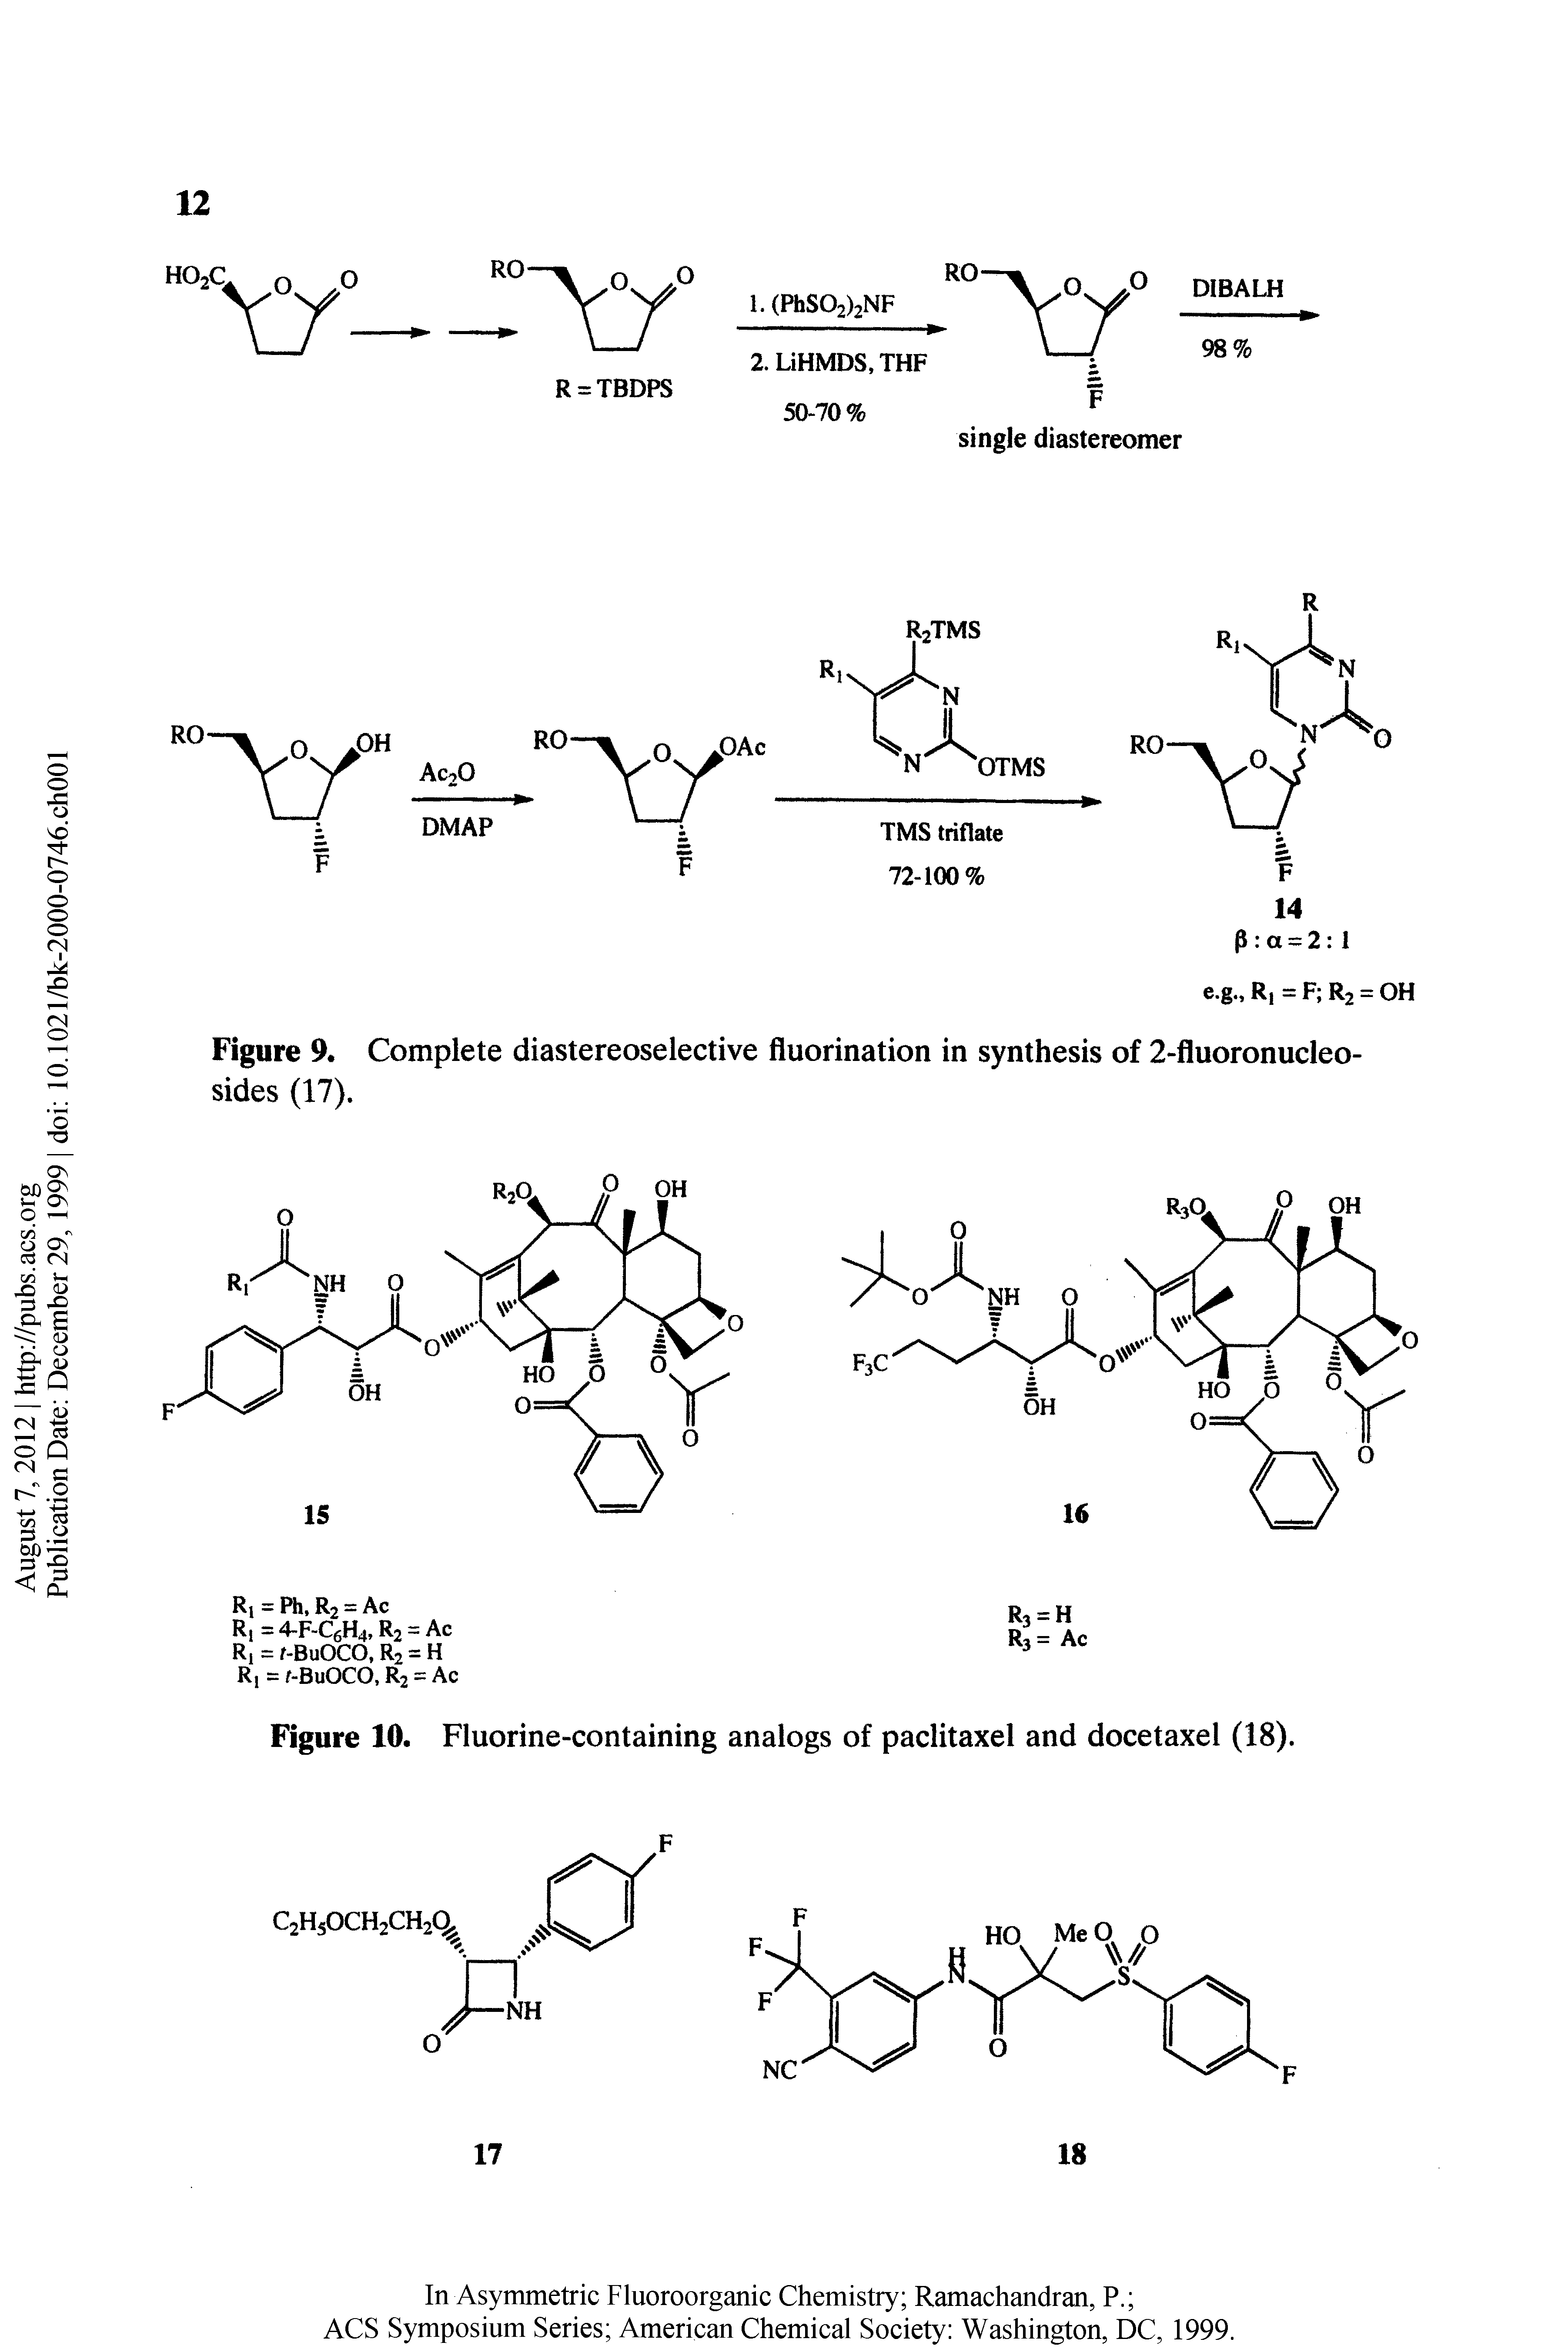 Figure 10. Fluorine-containing analogs of paclitaxel and docetaxel (18).